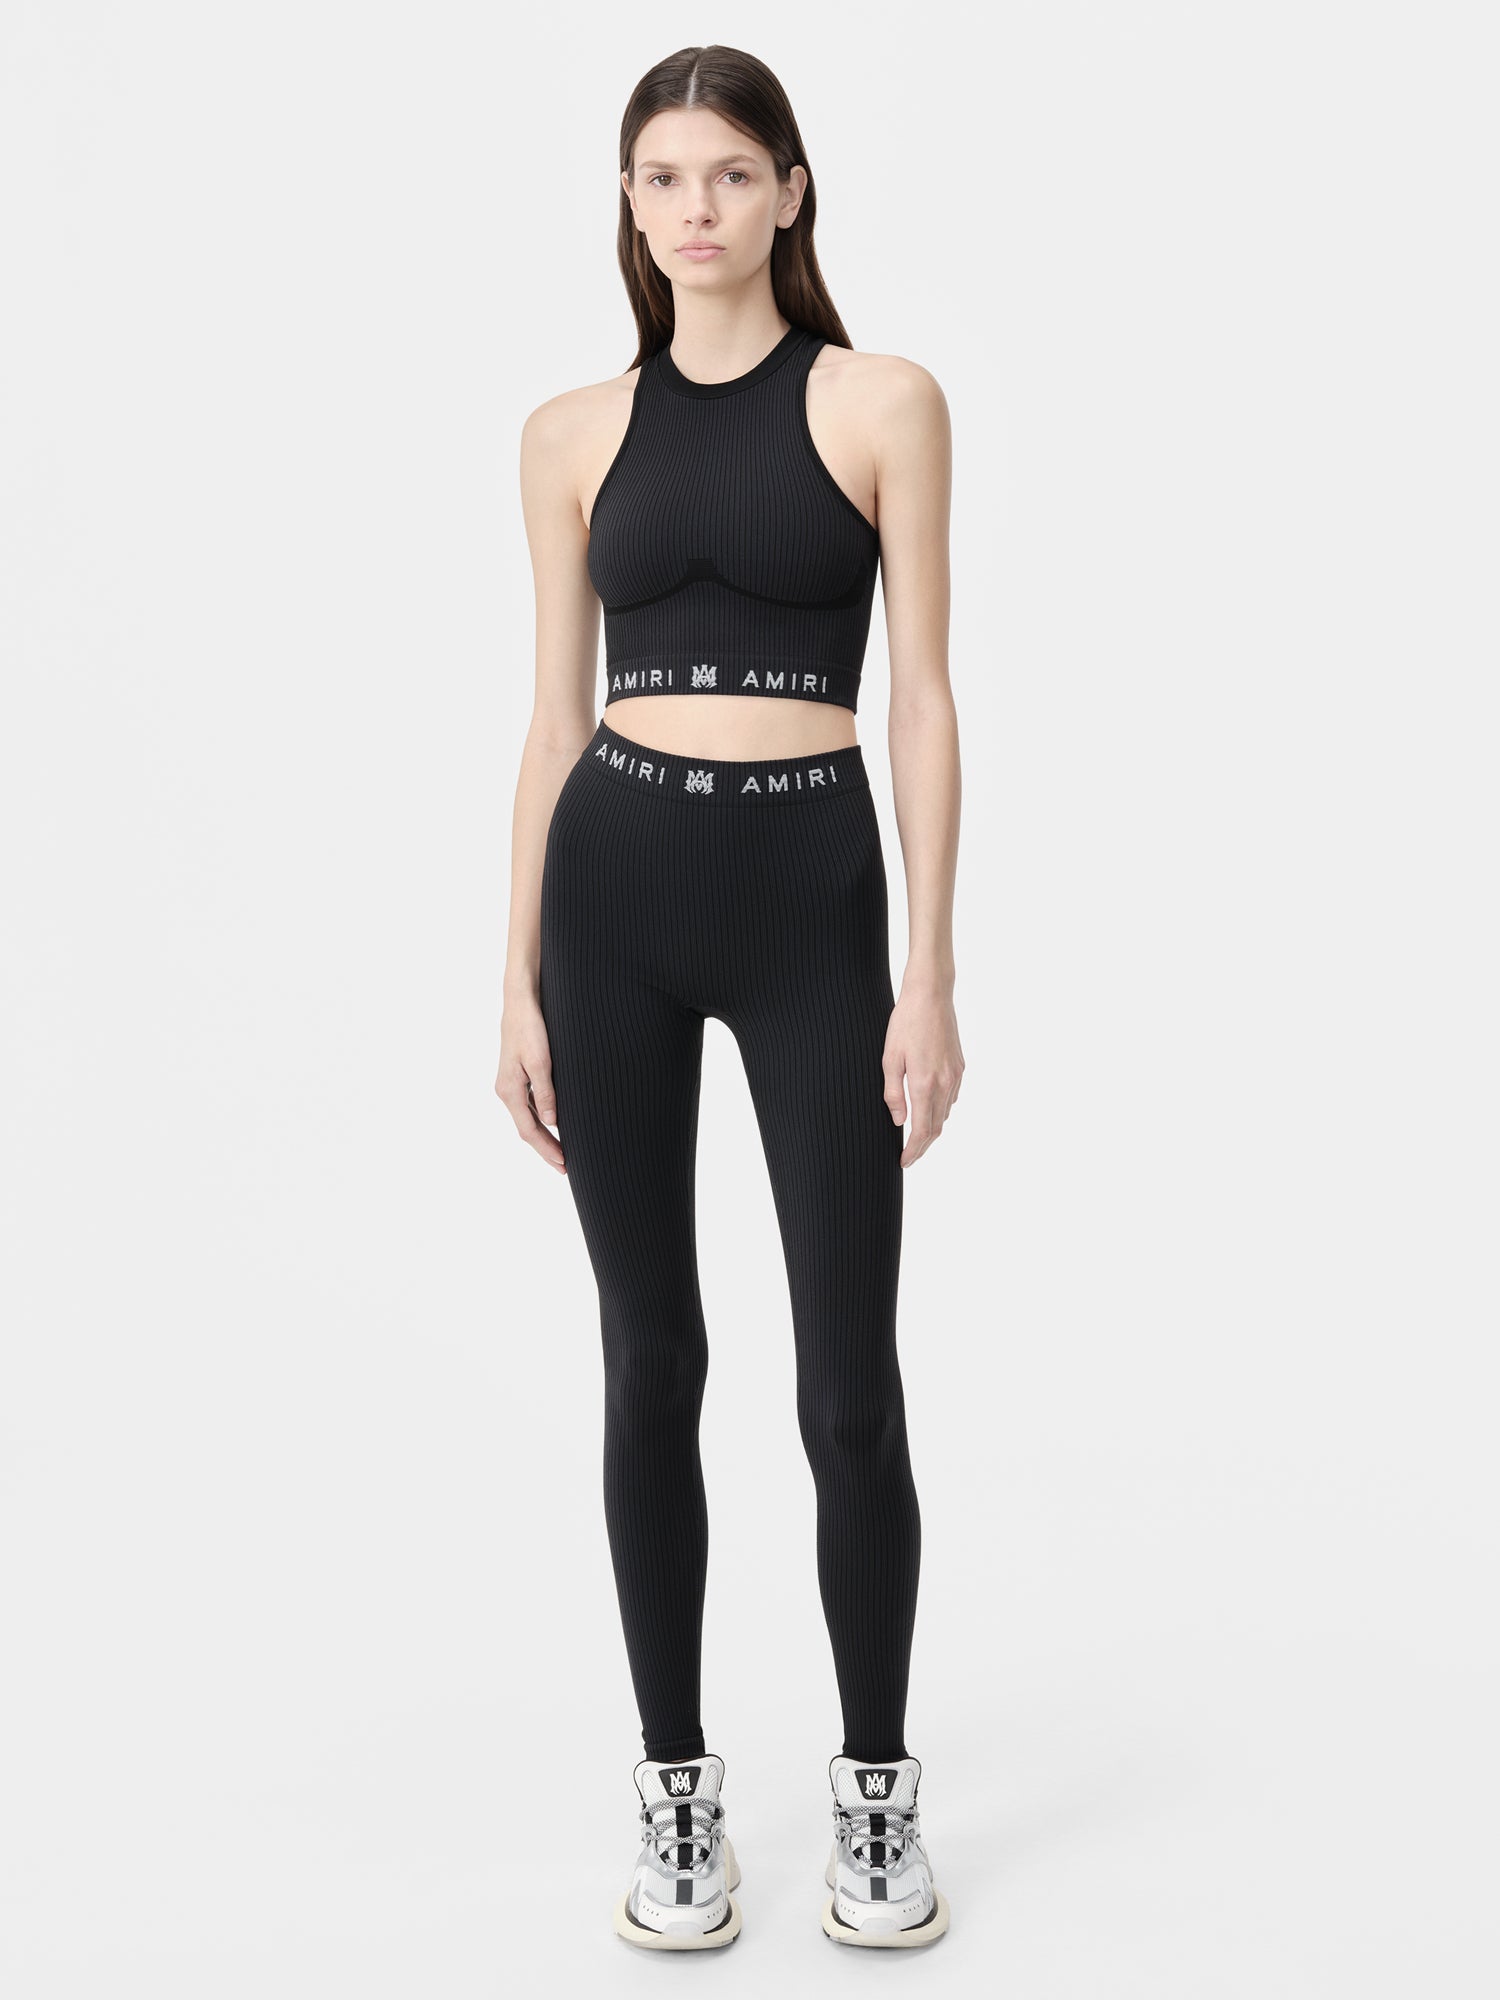 Product WOMEN - MA RIBBED SEAMLESS LEGGING - Black featured image